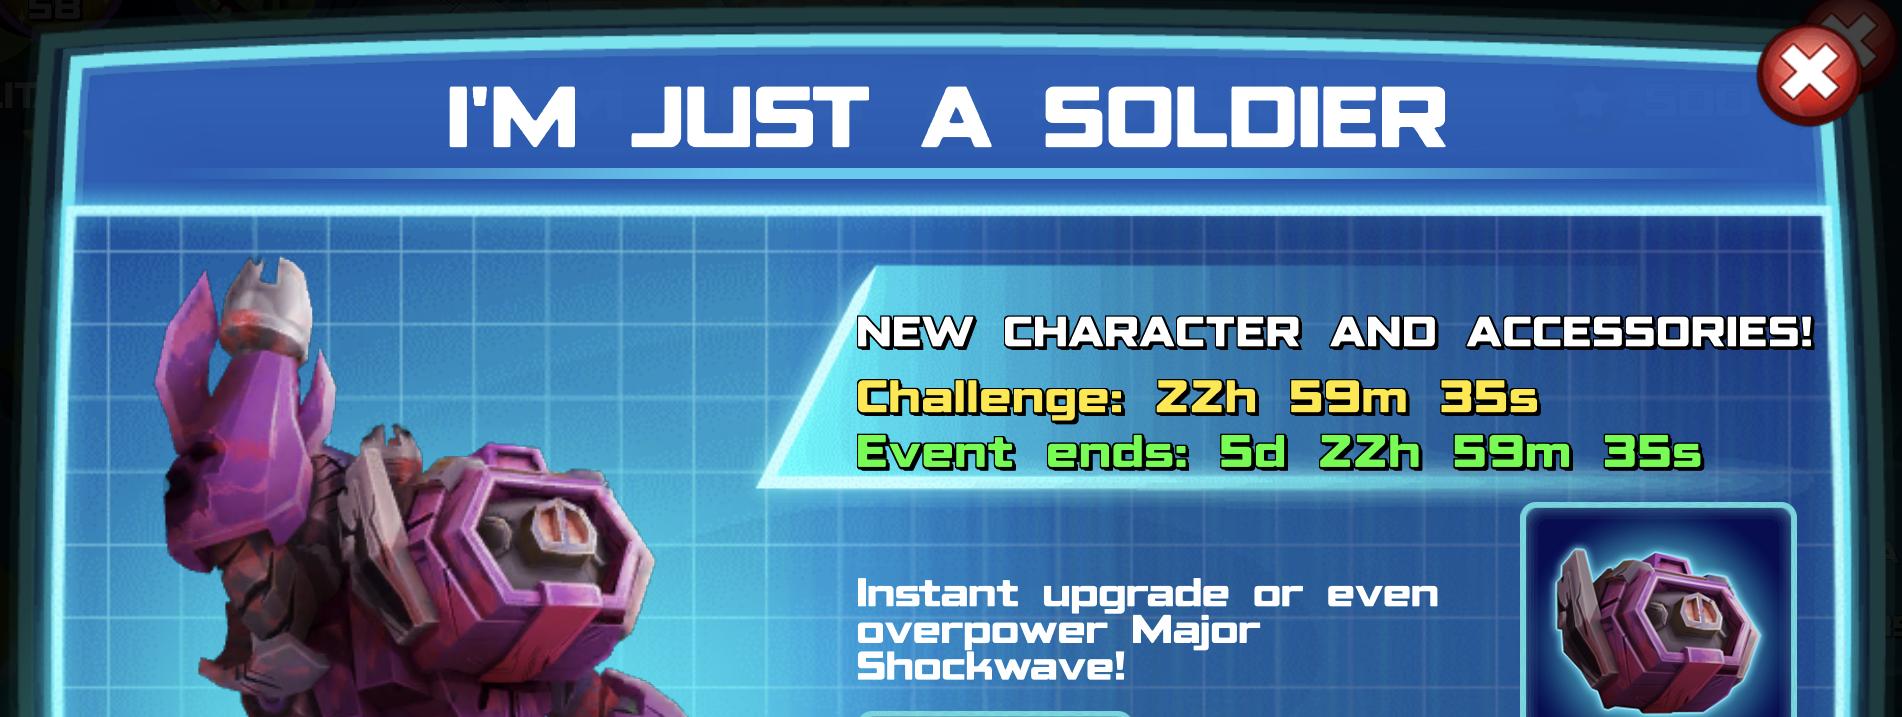 The event banner for I’m just a soldier